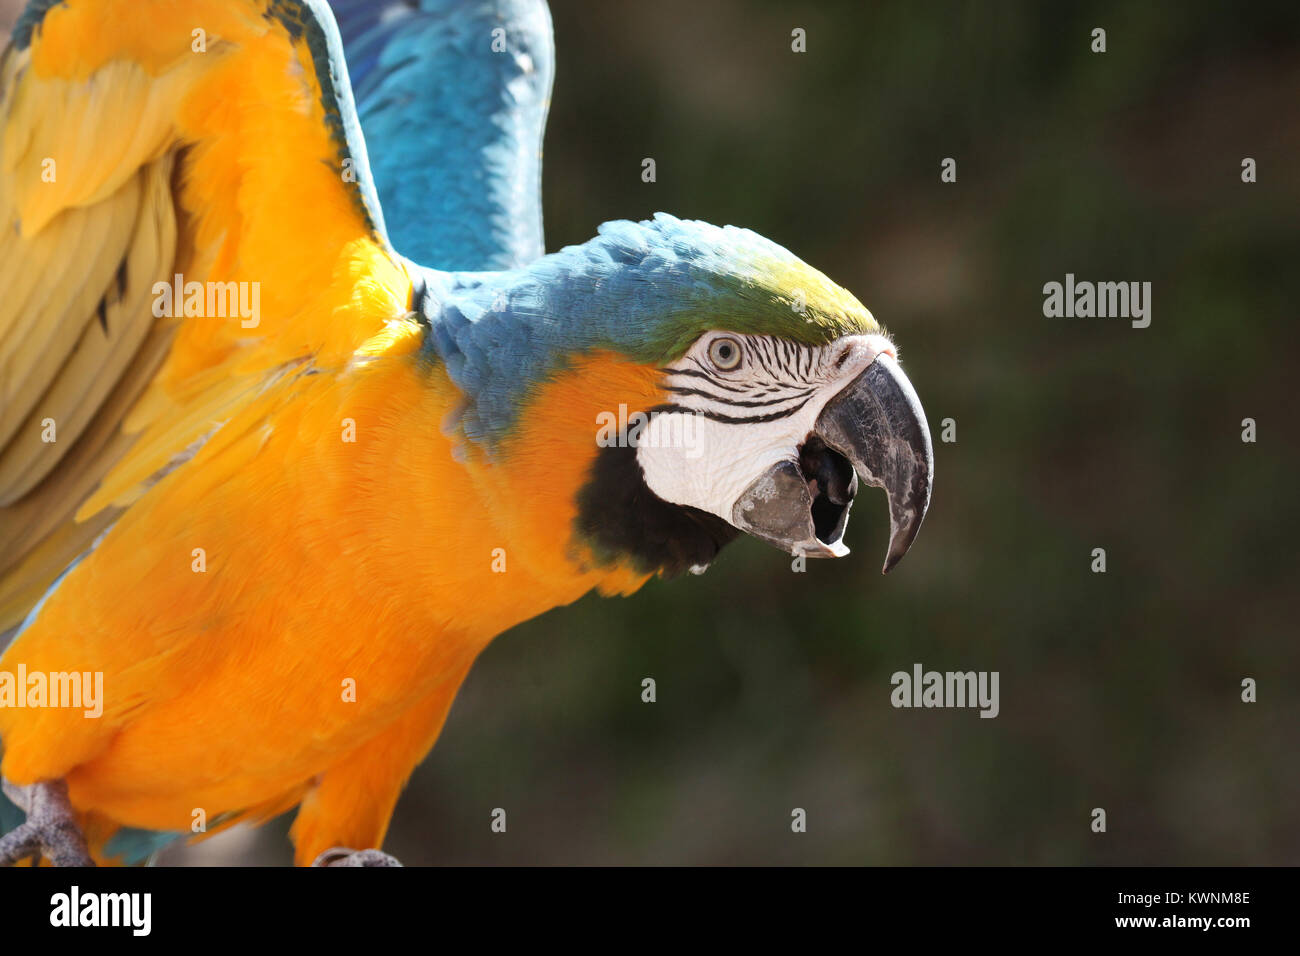 Yellow & Blue Macaw parrot leaning forward with its beak open, against a dark green background, Mexico. Stock Photo